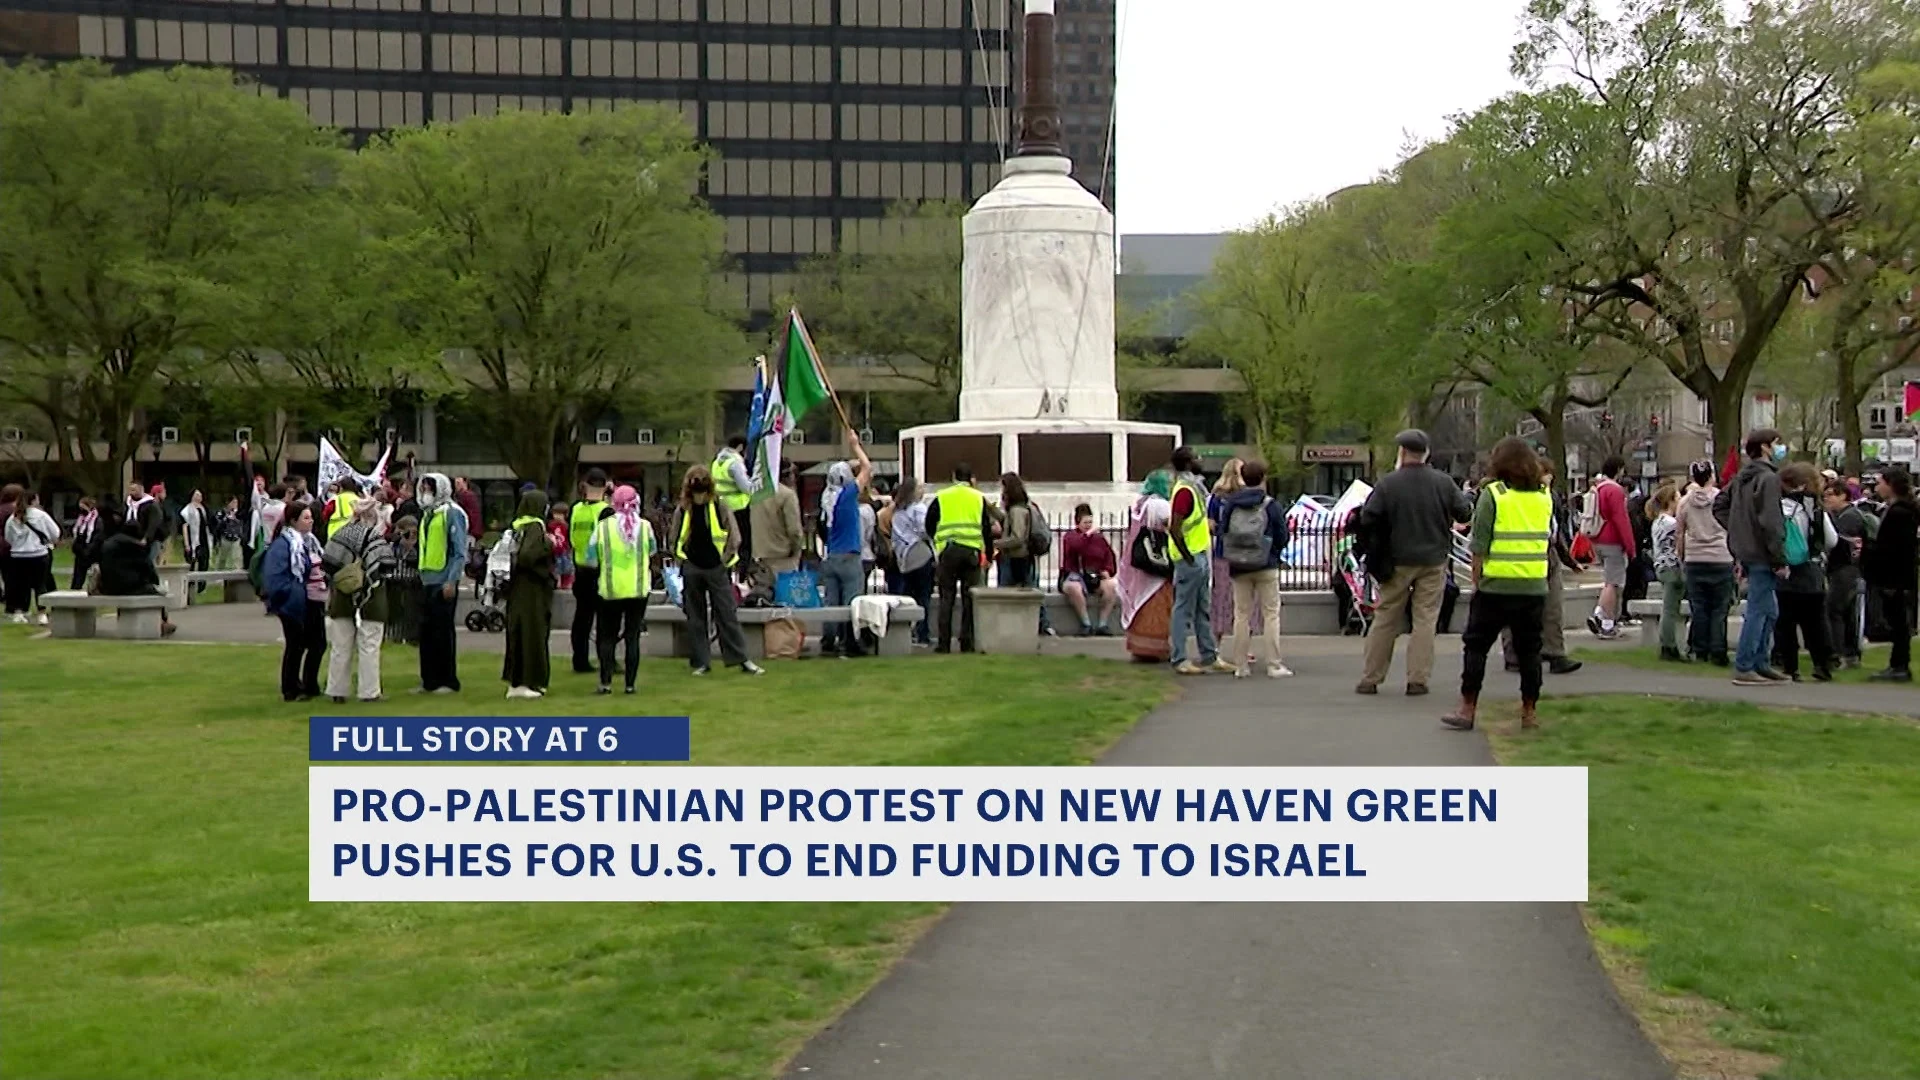 Pro-Palestinian protest held on New Haven Green